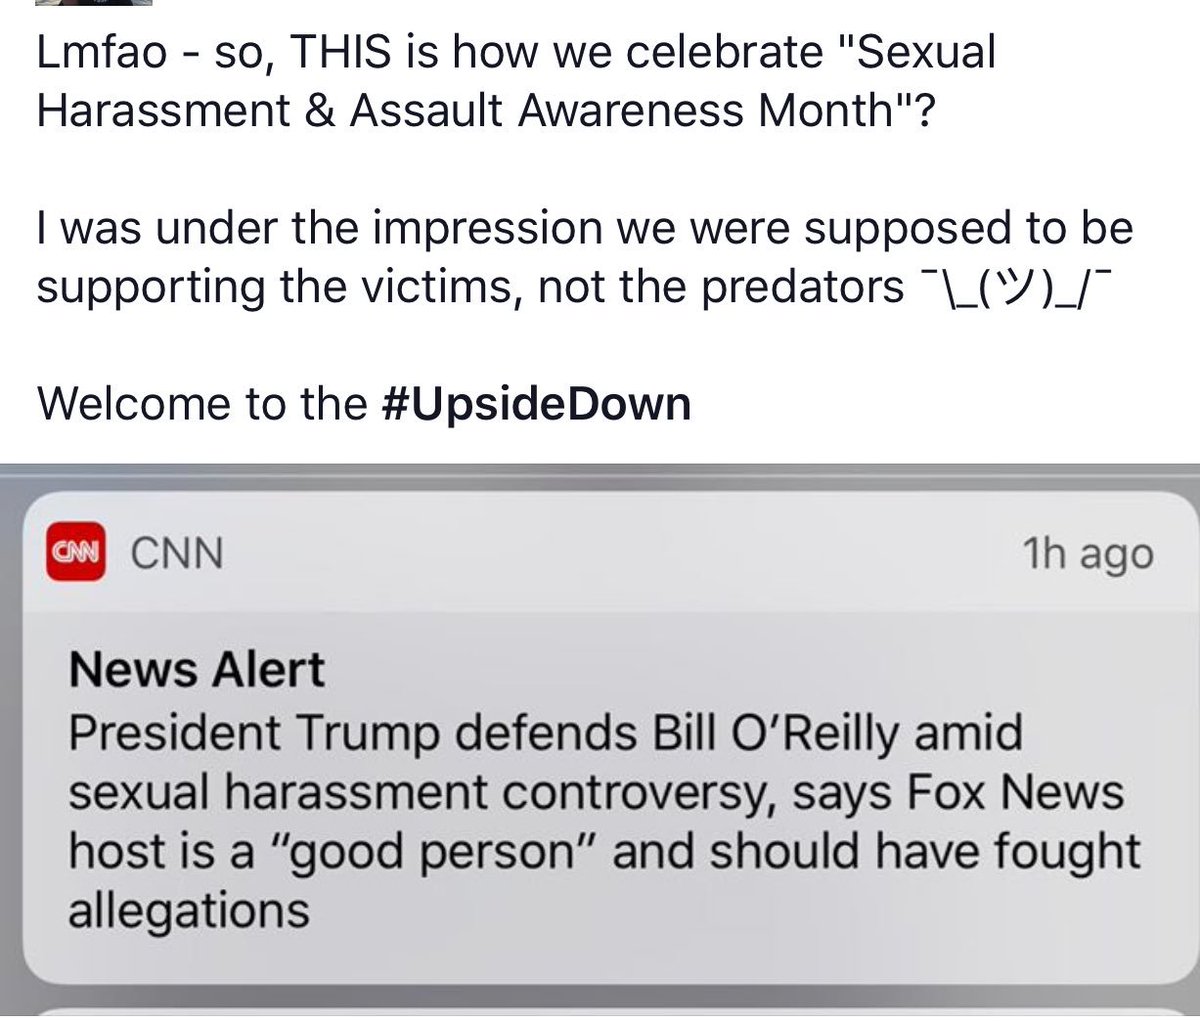 #SexualHarassmentAwareness month apparently has a whole different meaning than we thought 😳
@JoyAnnReid @HuffingtonPost @CNN @ChelseaClinton